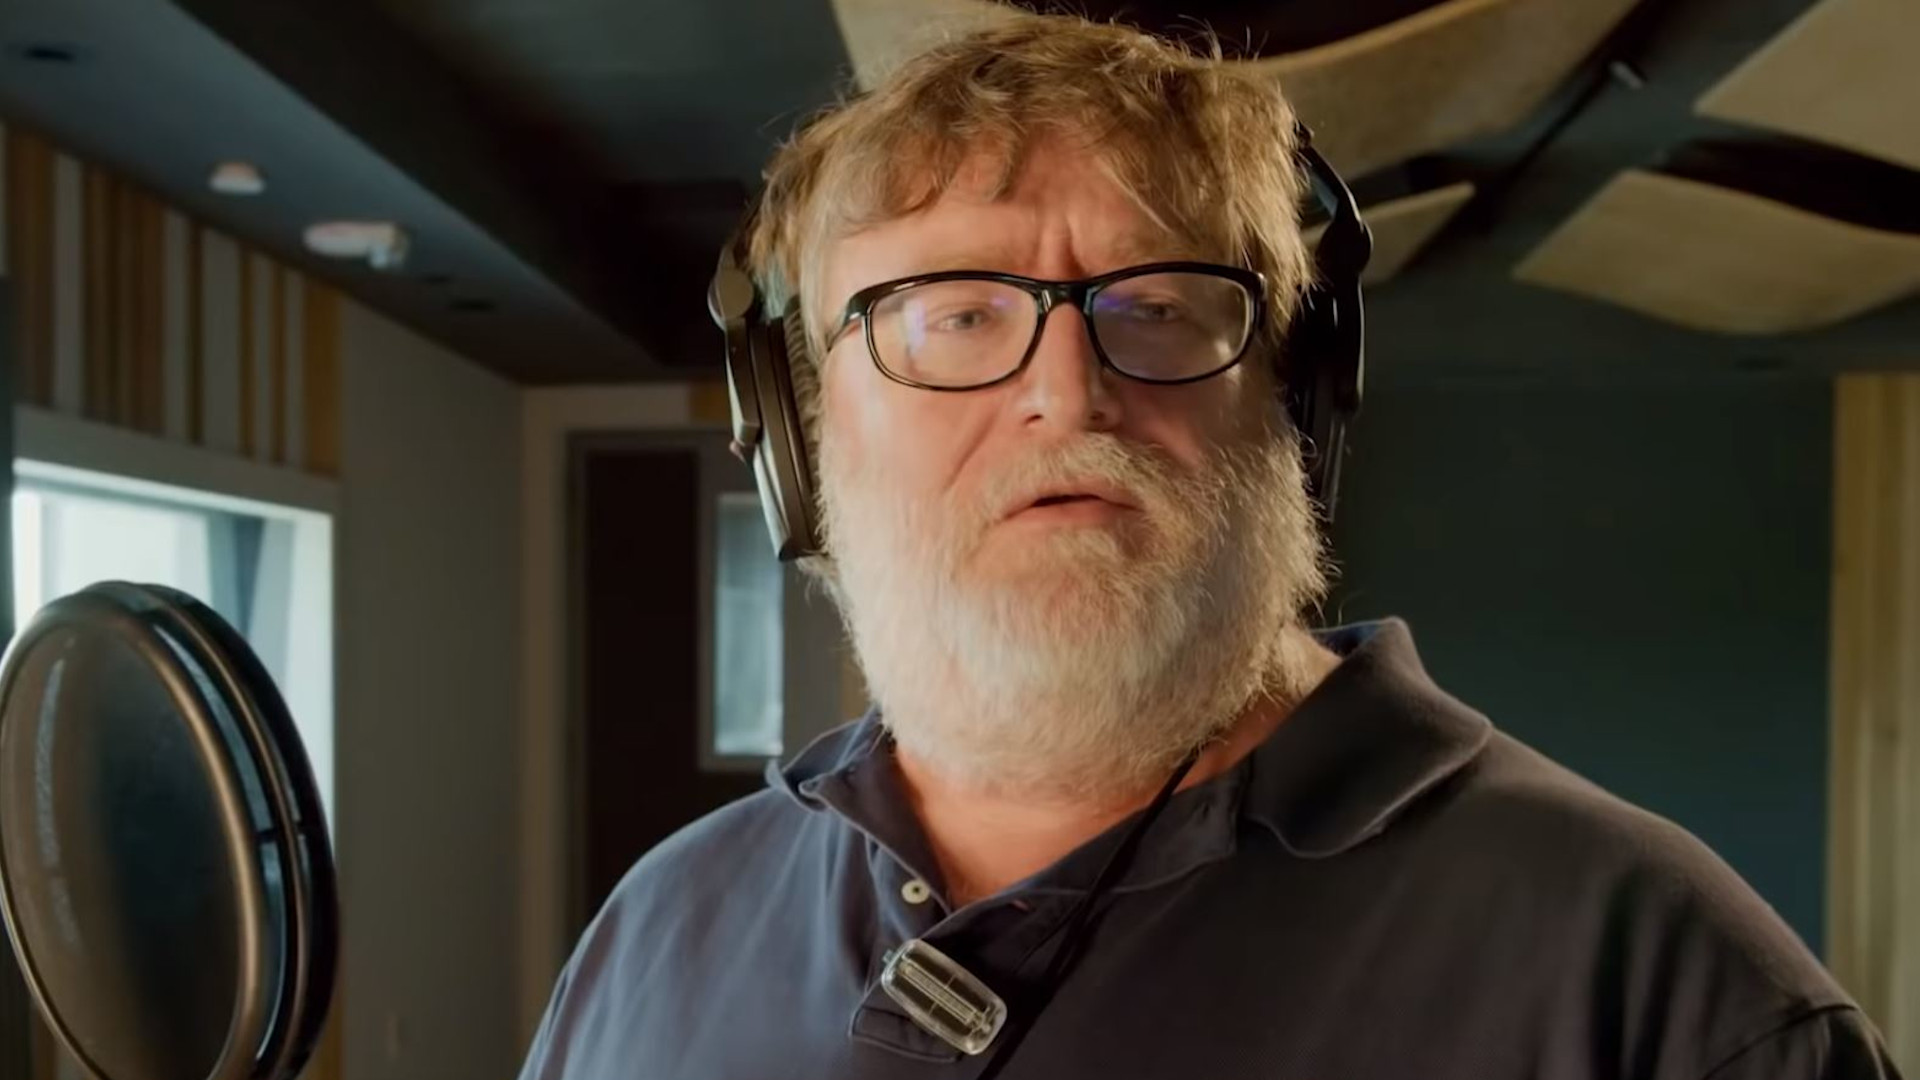 Gabe Newell is proud of the esports industry's growth so far